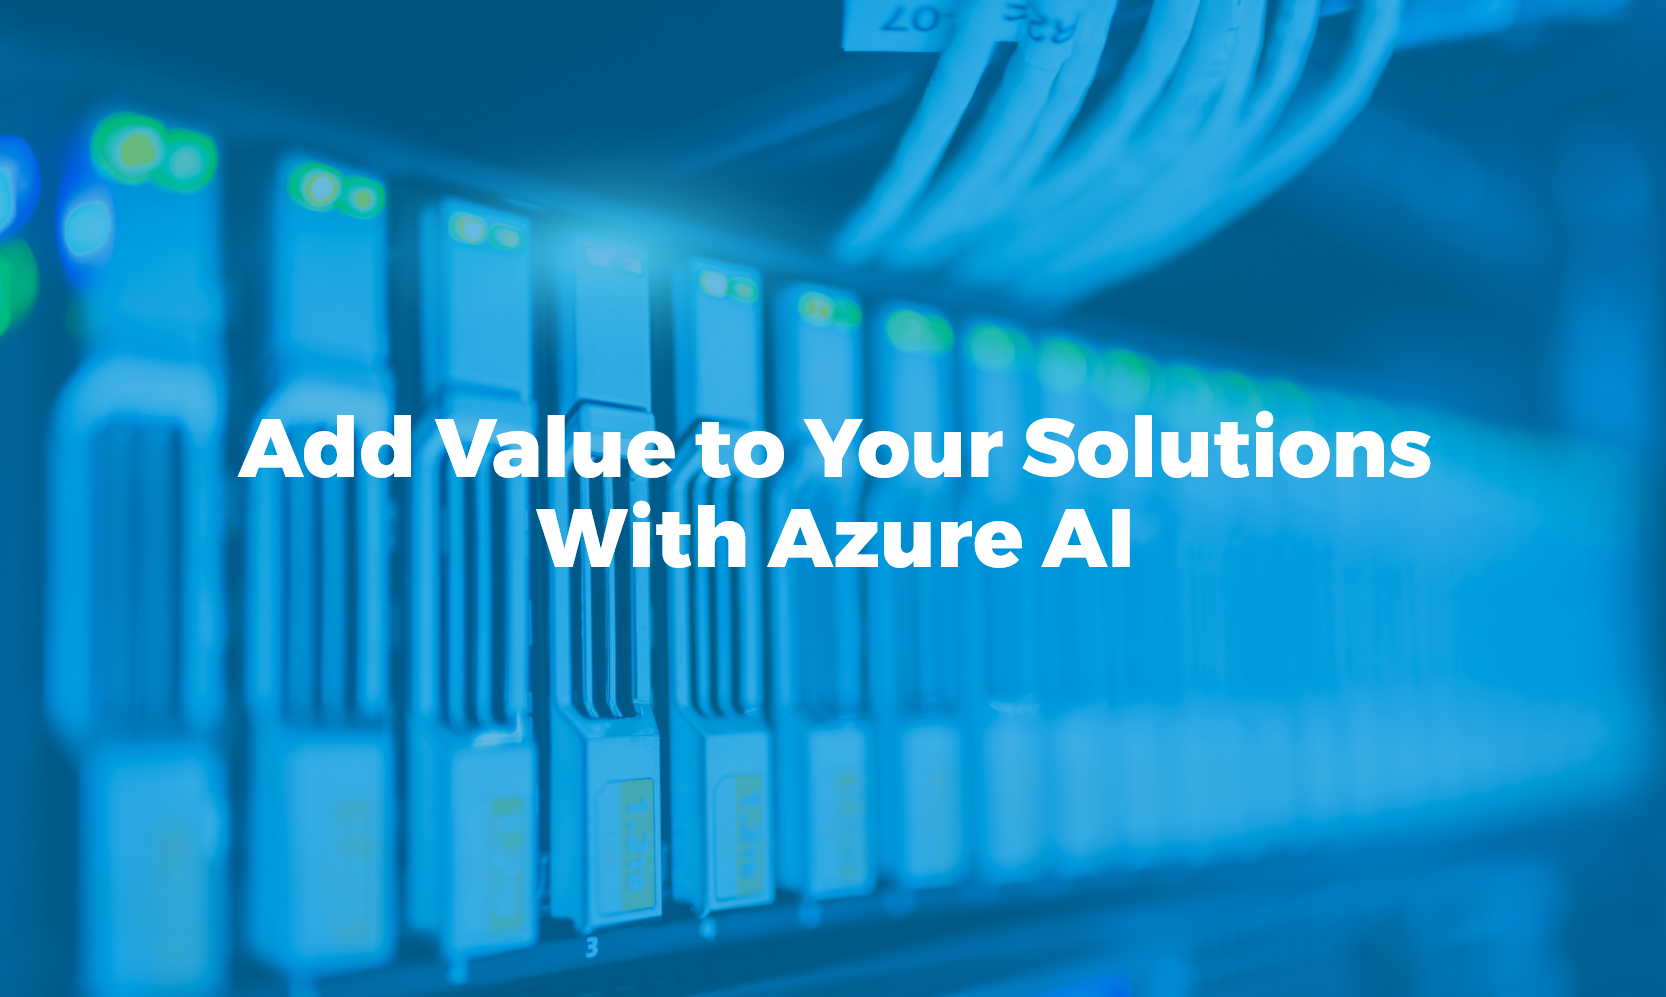 How to Bring Value to Your Customers With Artificial Intelligence